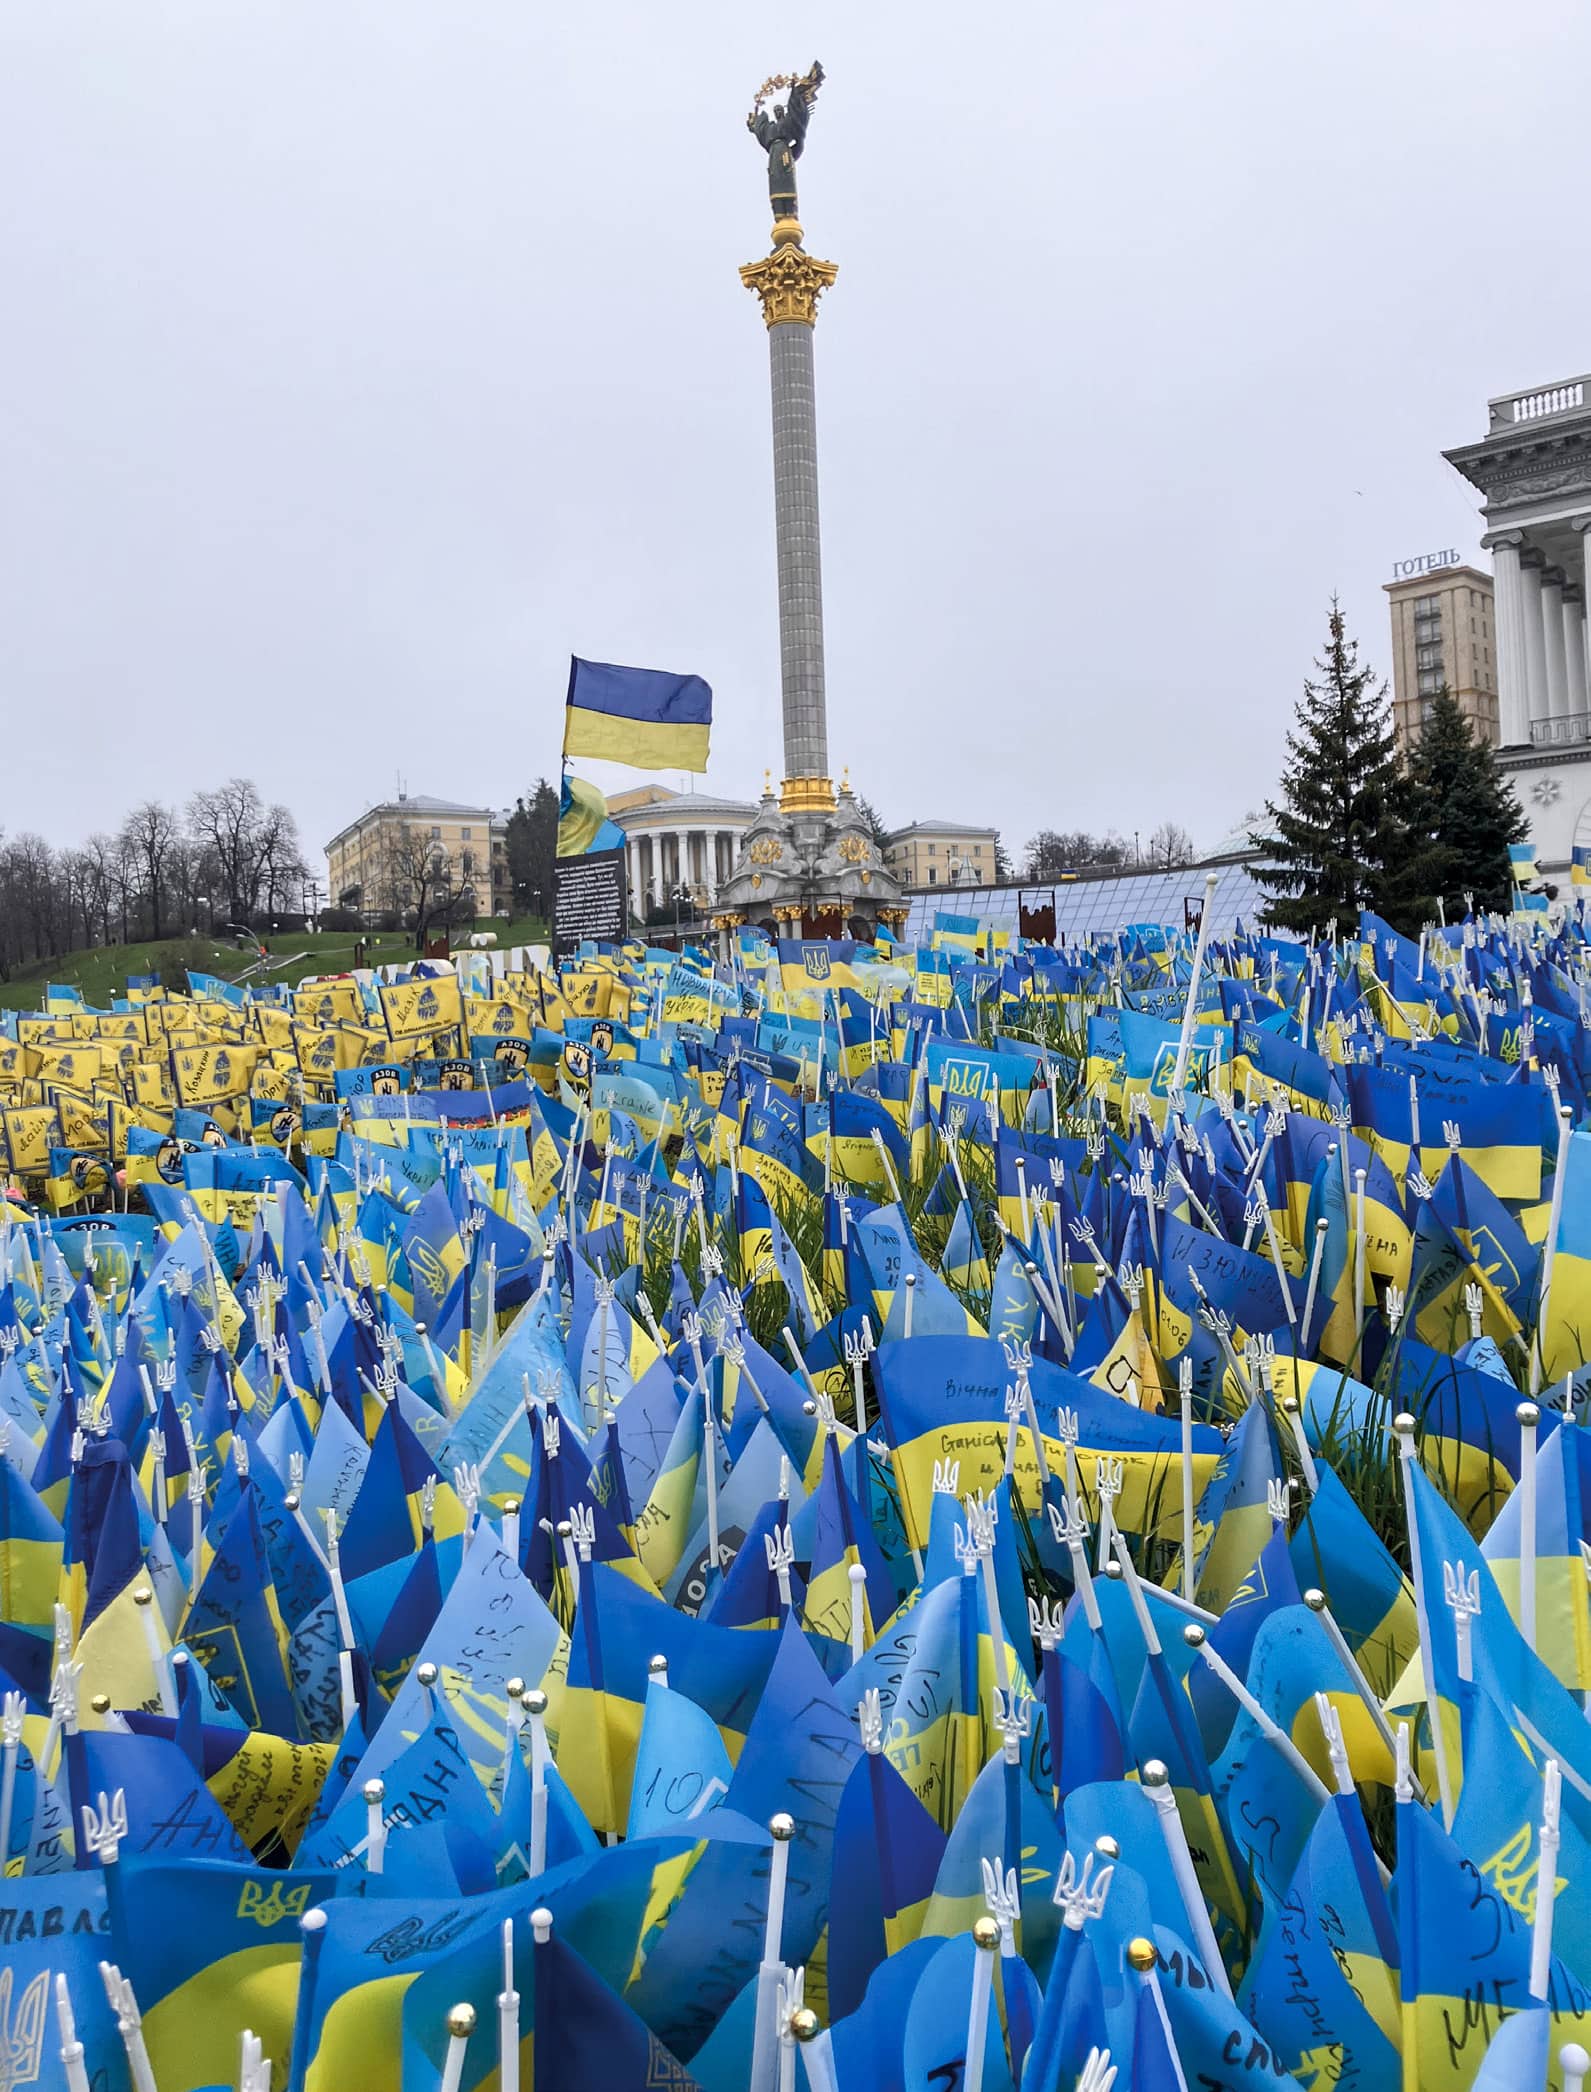 Maidan Nezalezhnosti, Independence Square: the Ukrainian flags in the grass mark the deaths of civilians in the conflict.